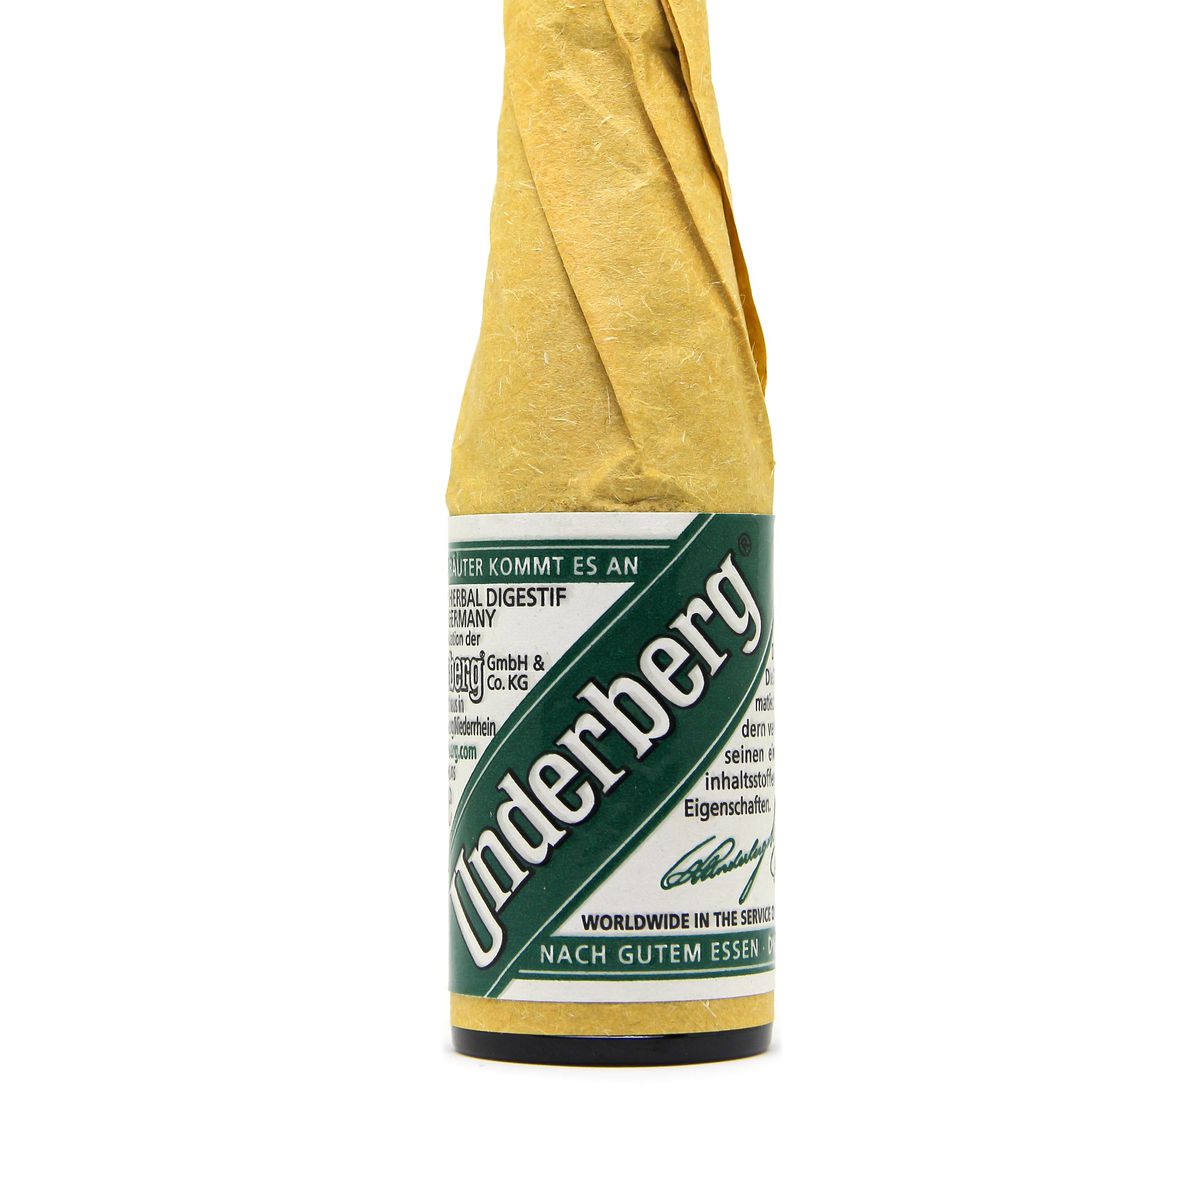 A little bottle of alcohol drink of Underberg on a white background.